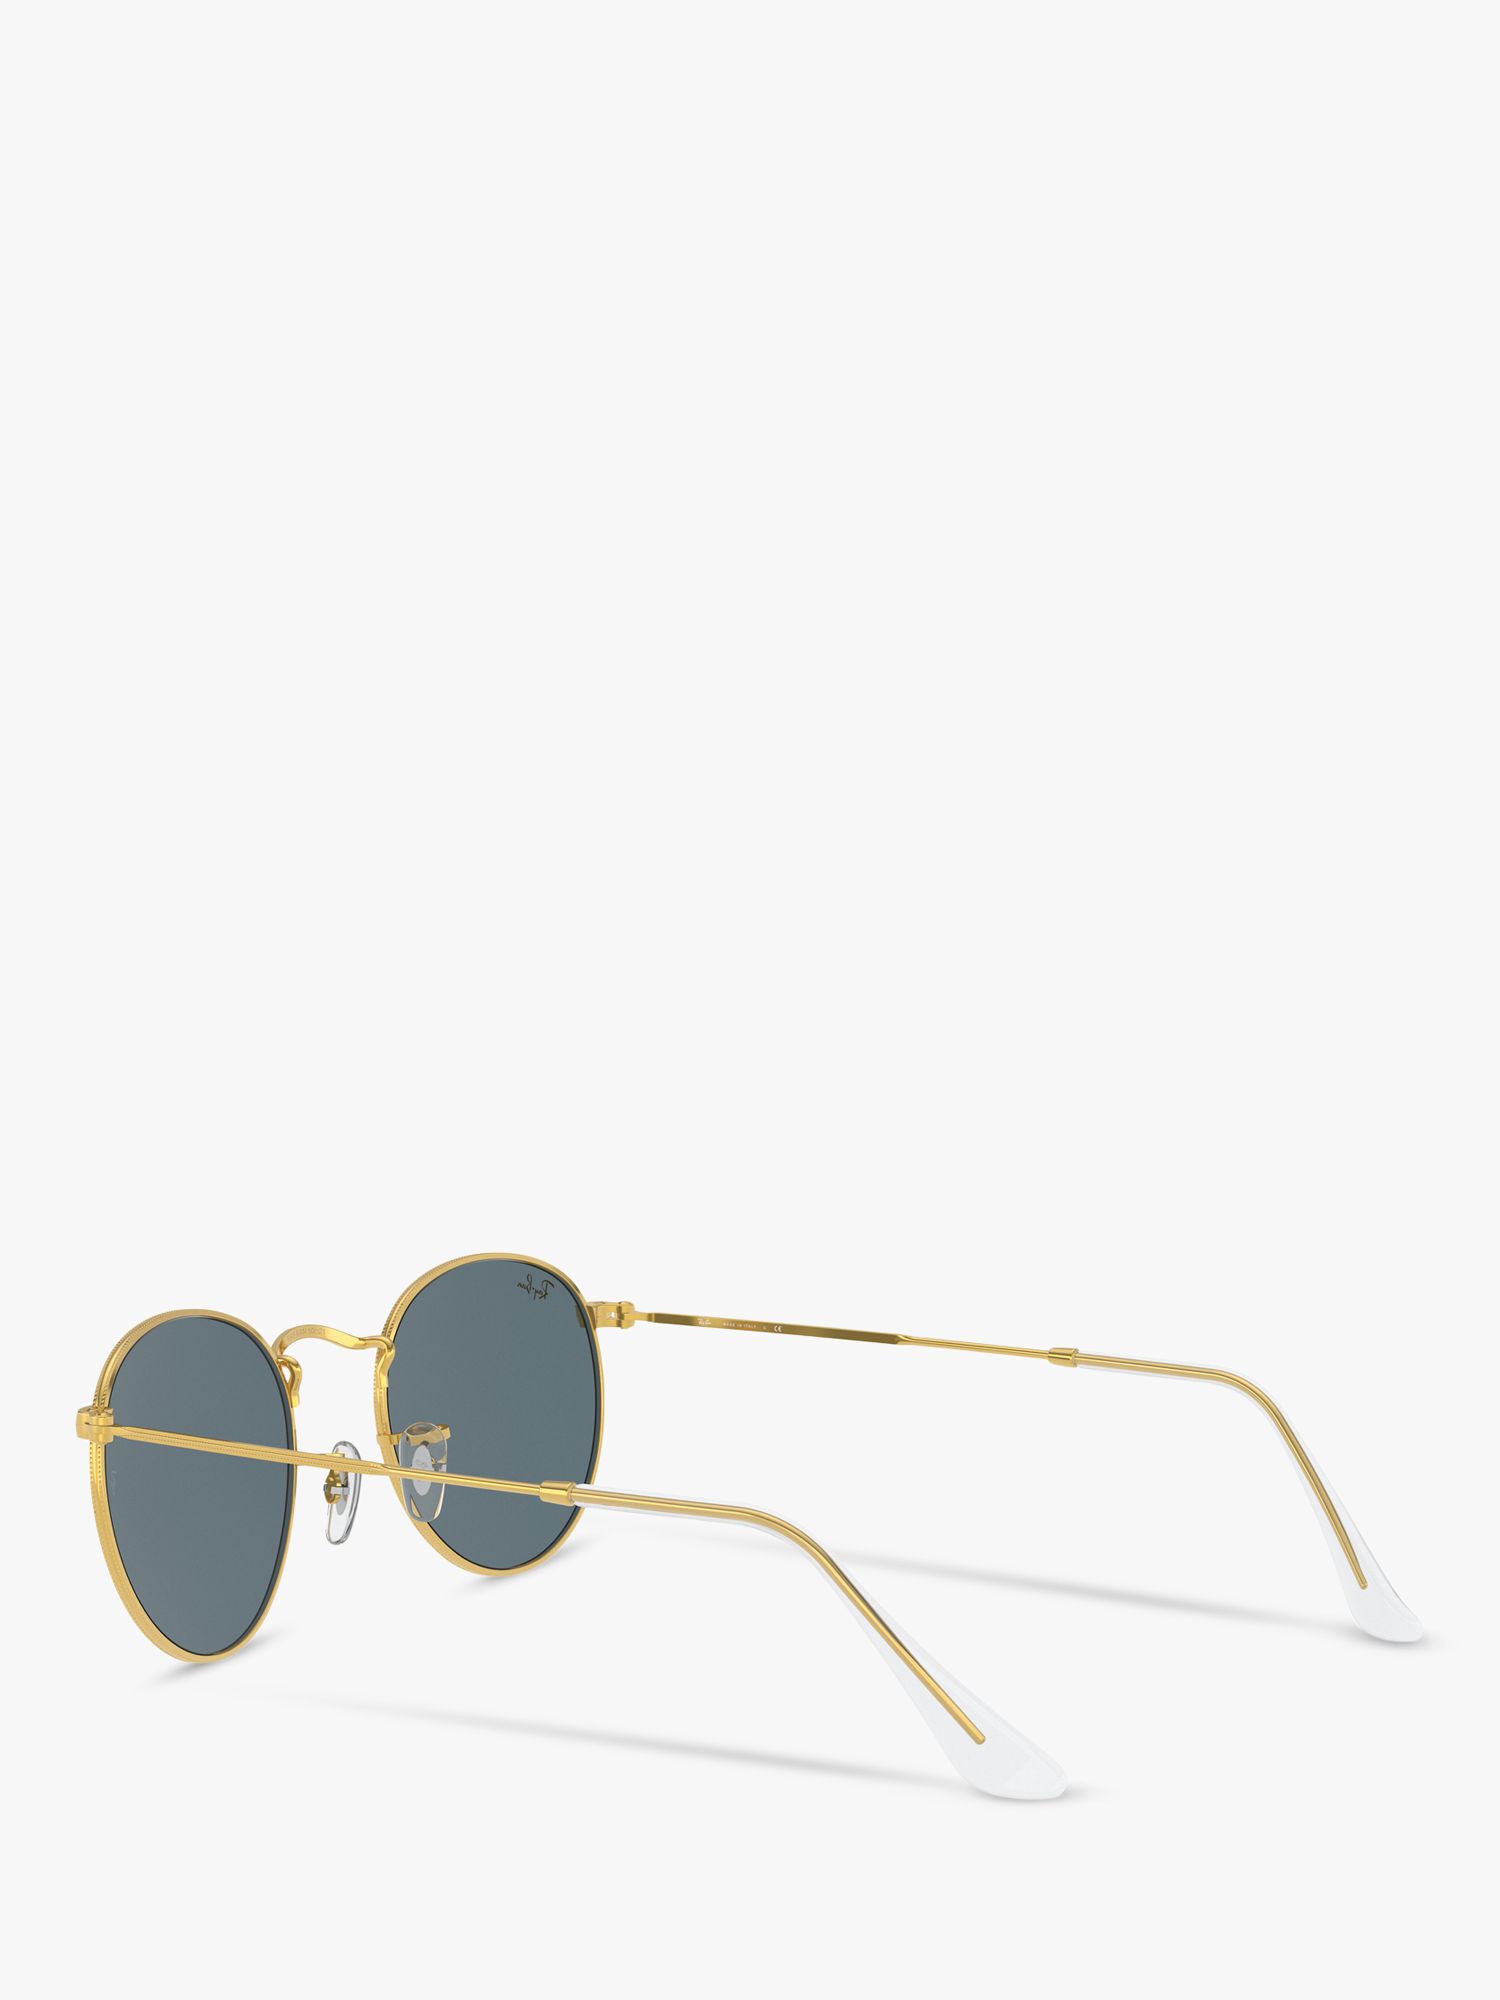 Buy Ray-Ban RB3447 Men's Round Metal Sunglasses, Legend Gold/Classic Blue Online at johnlewis.com